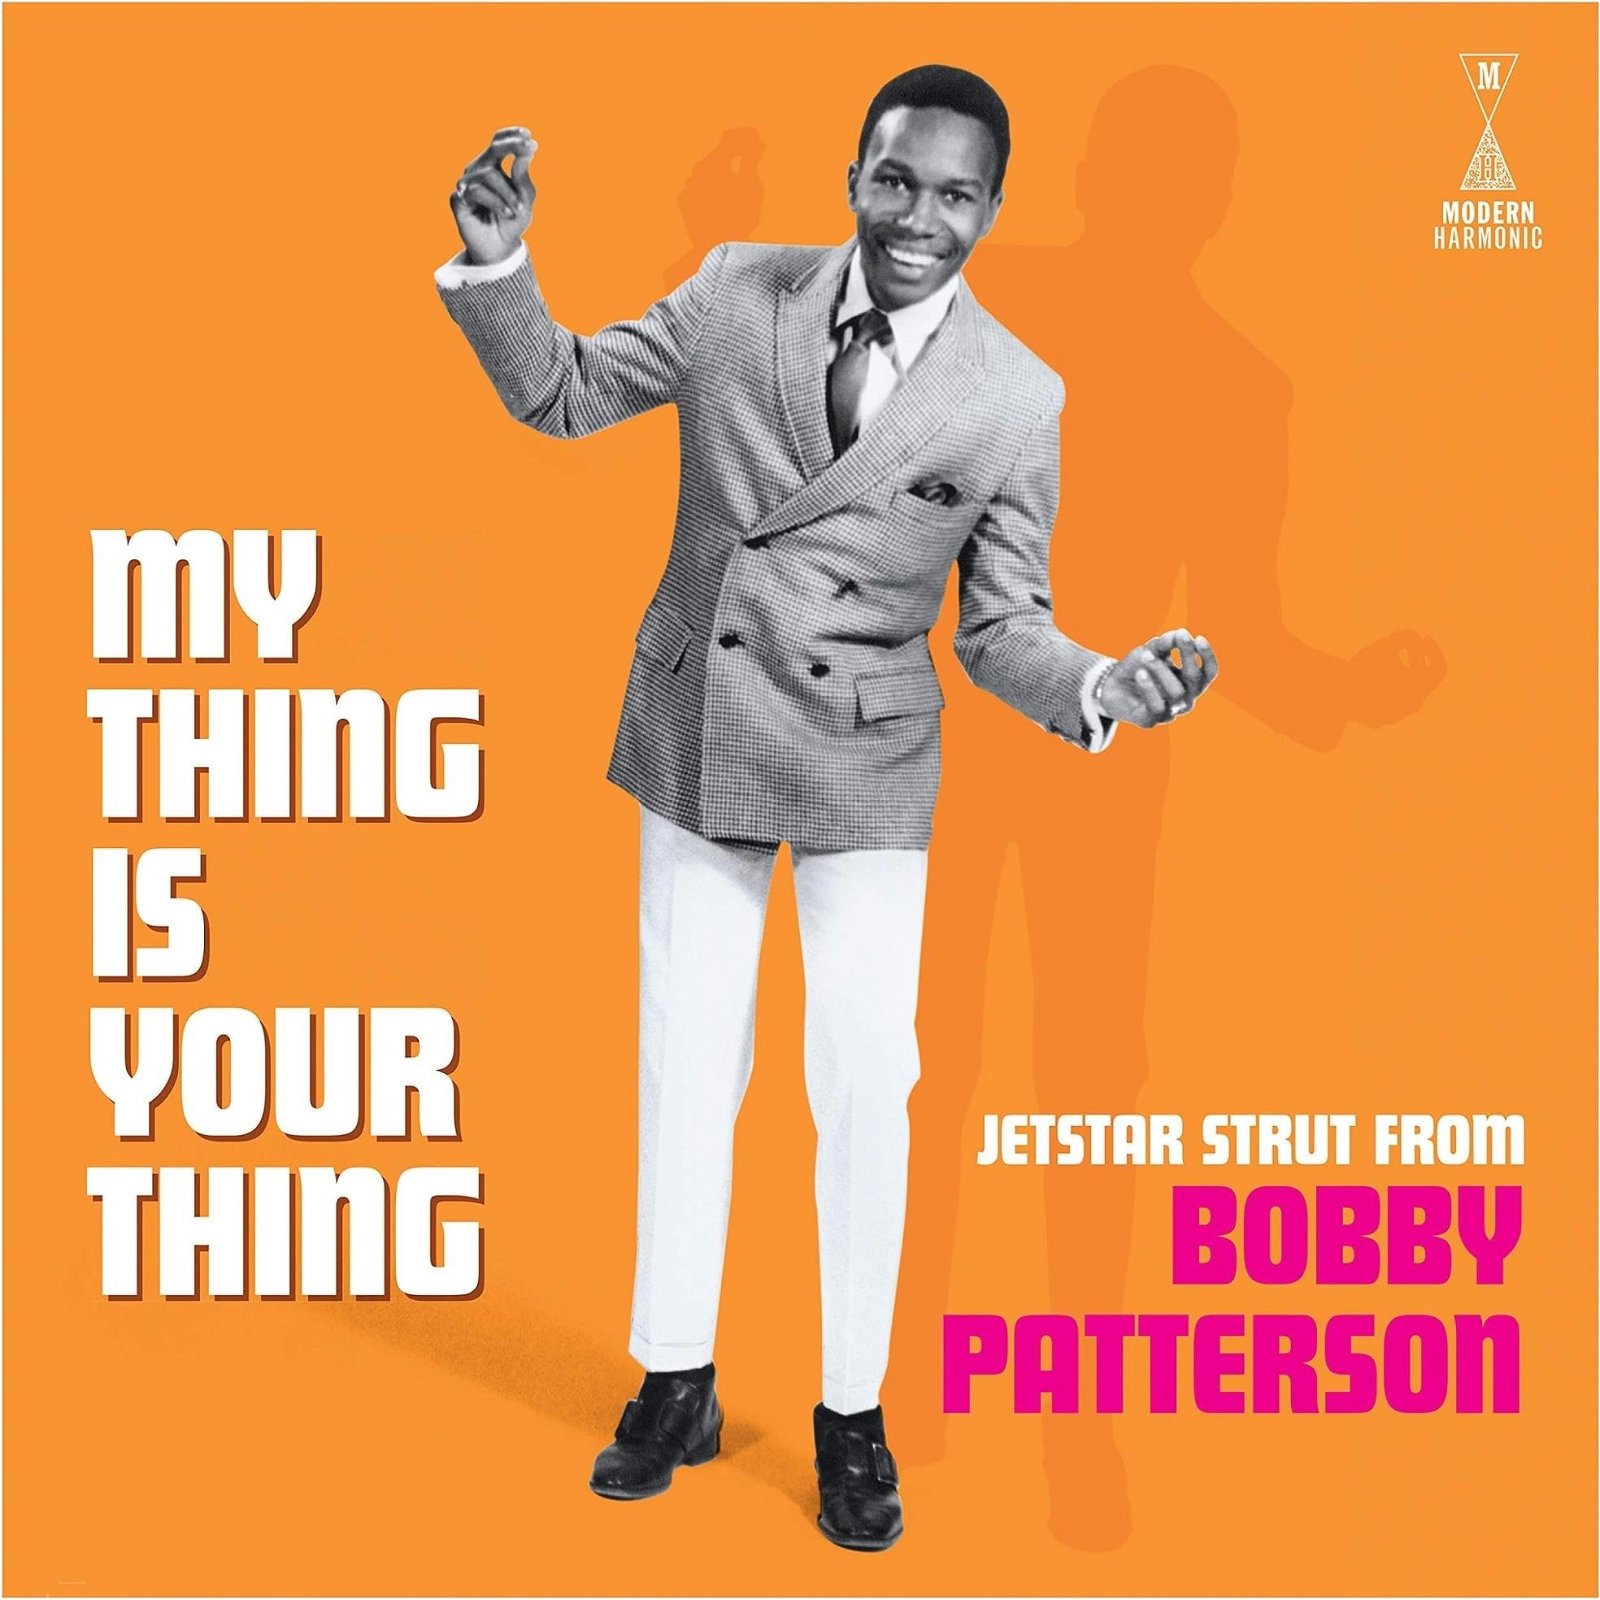 CD Shop - PATTERSON, BOBBY MY THING IS YOUR THING - JETSTAR STRUT FROM BOBBY PATTERSON